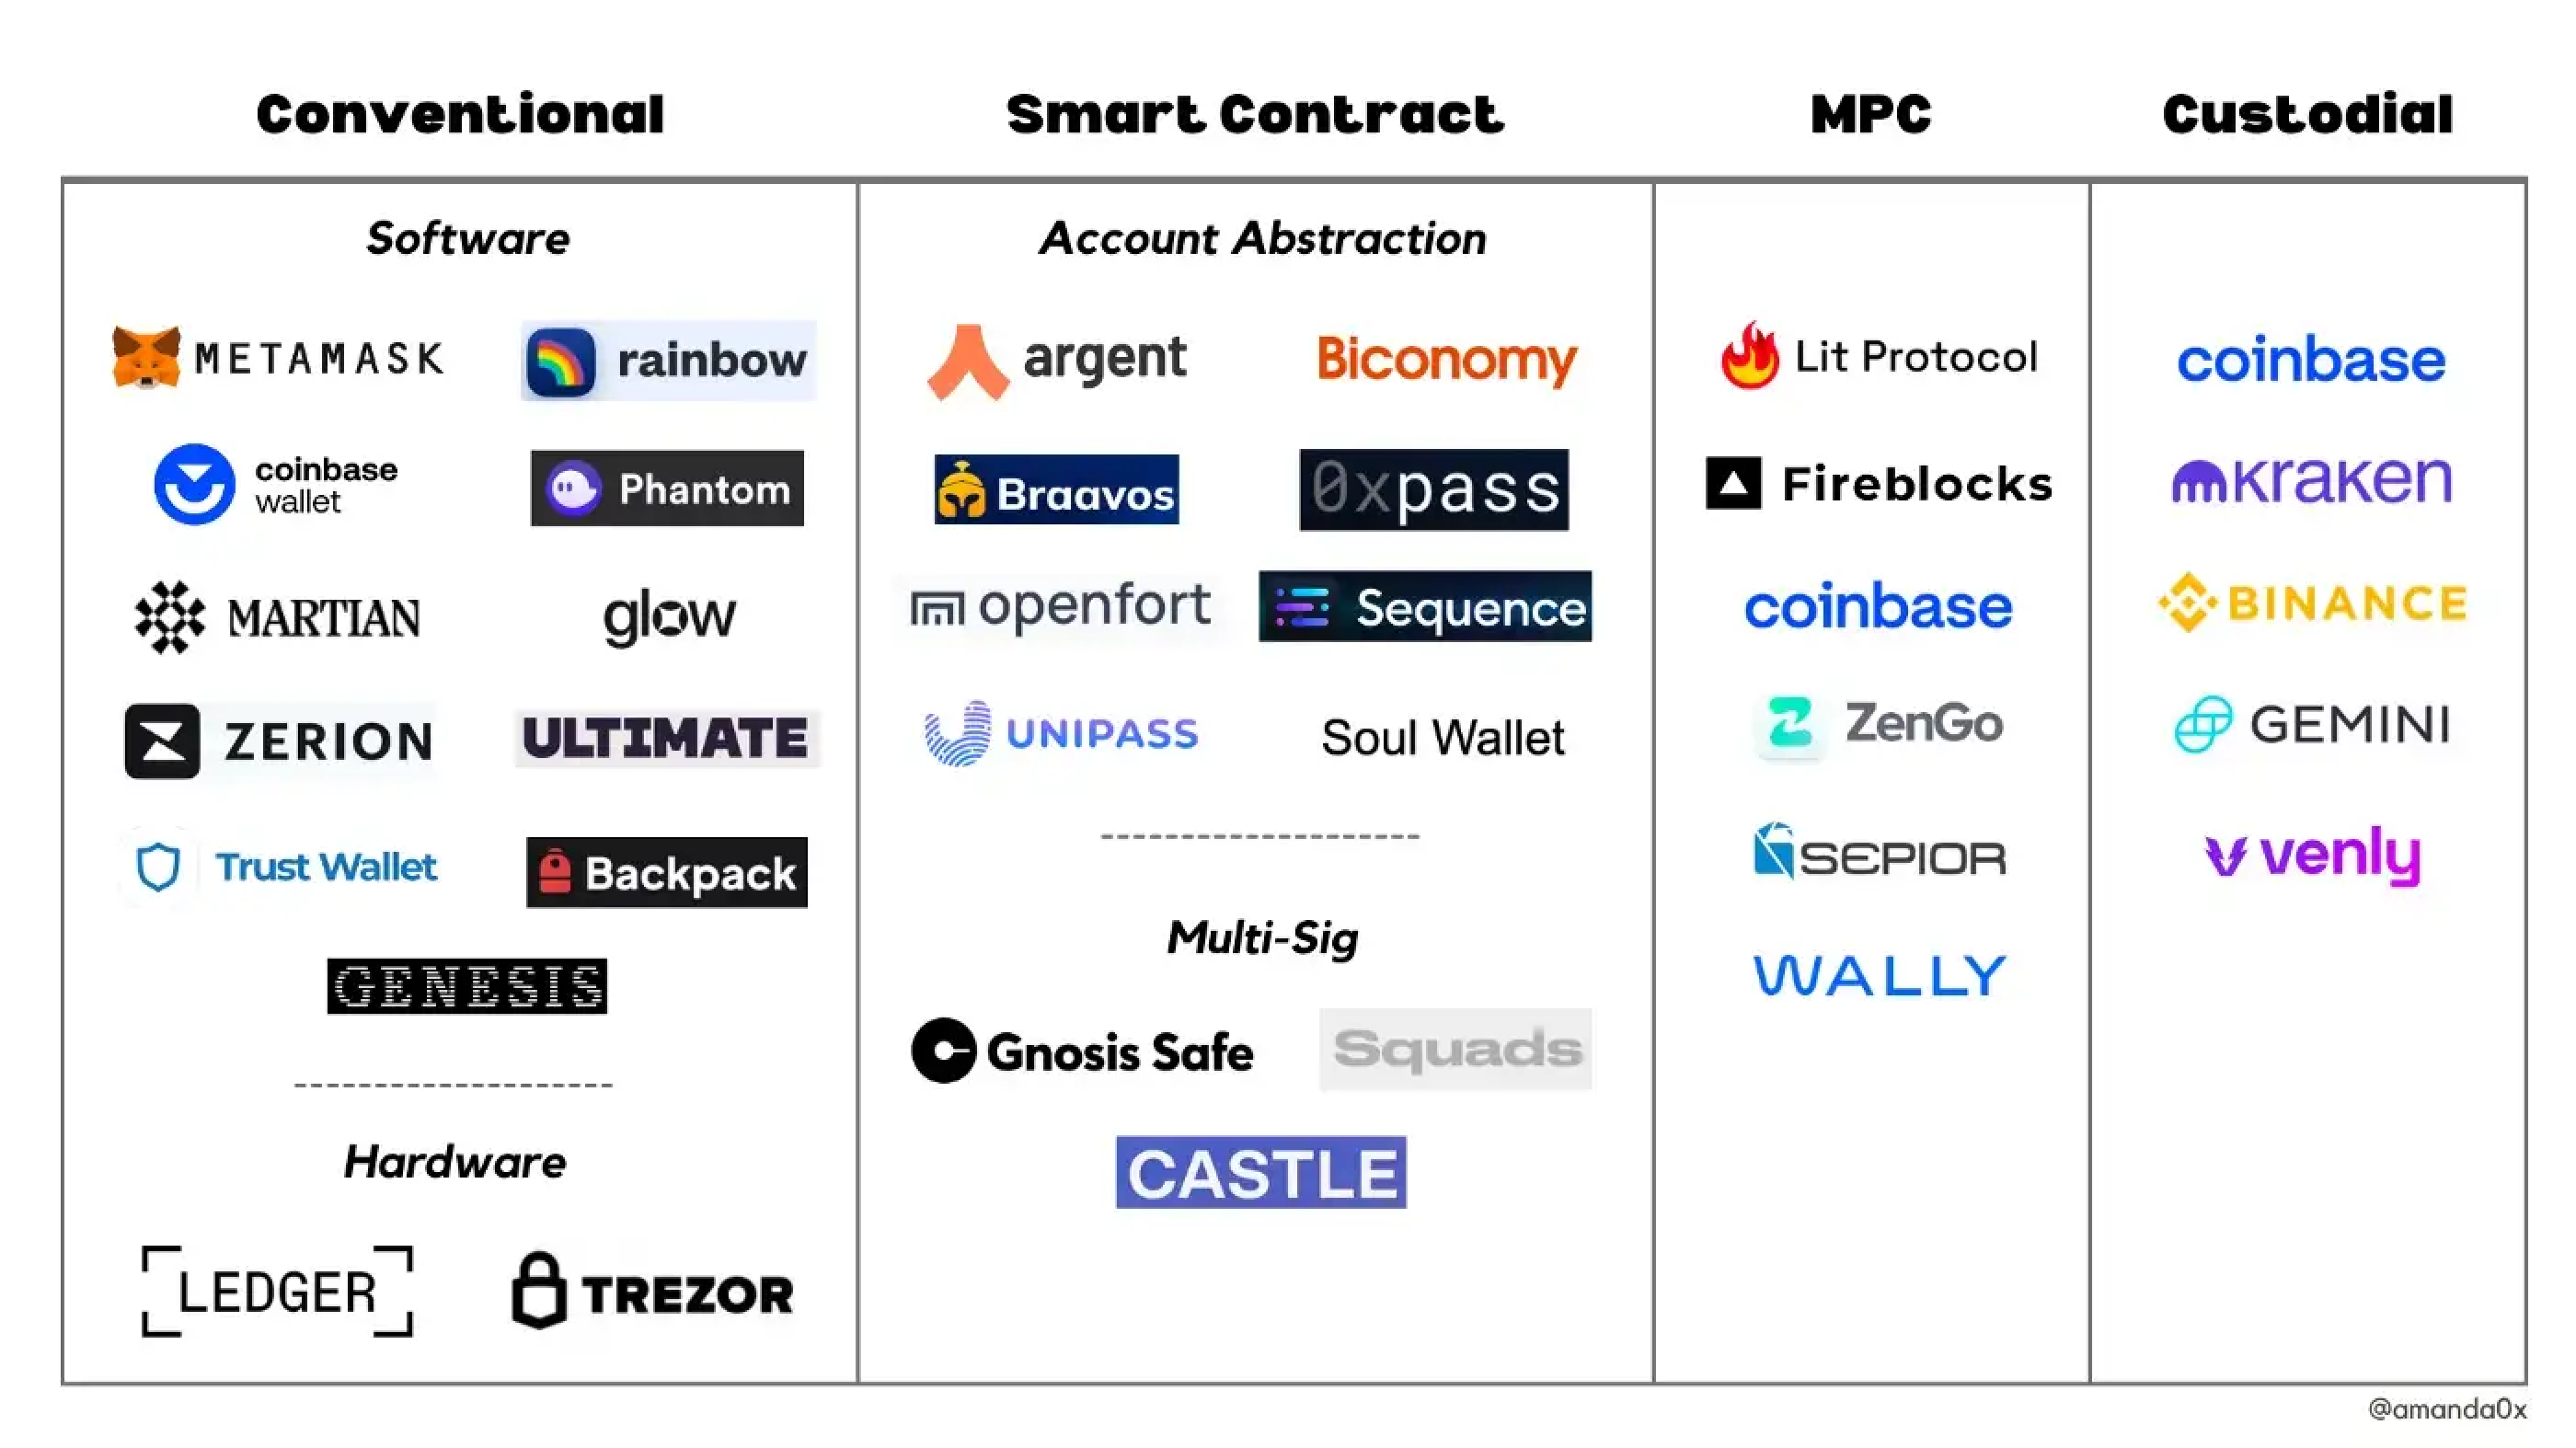 The cryptocurrency web3 wallet landscape, categorized into conventional software & hardware wallets, smart contract wallets with account abstraction and multisig, MPC wallets, and custodial wallets.